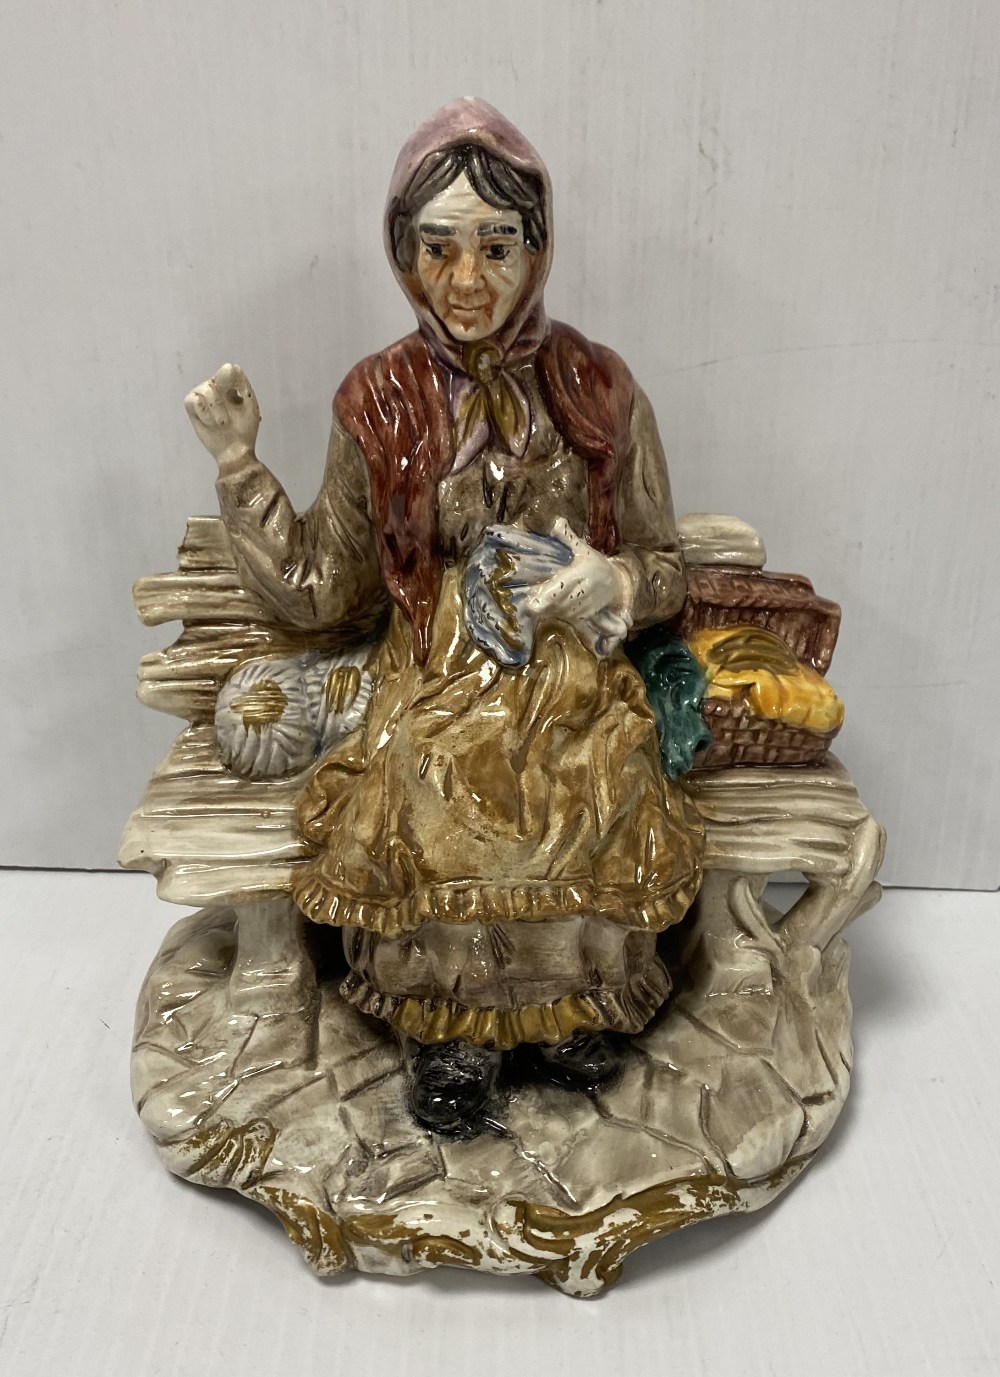 Capodimonte Figure of a Lady Seated